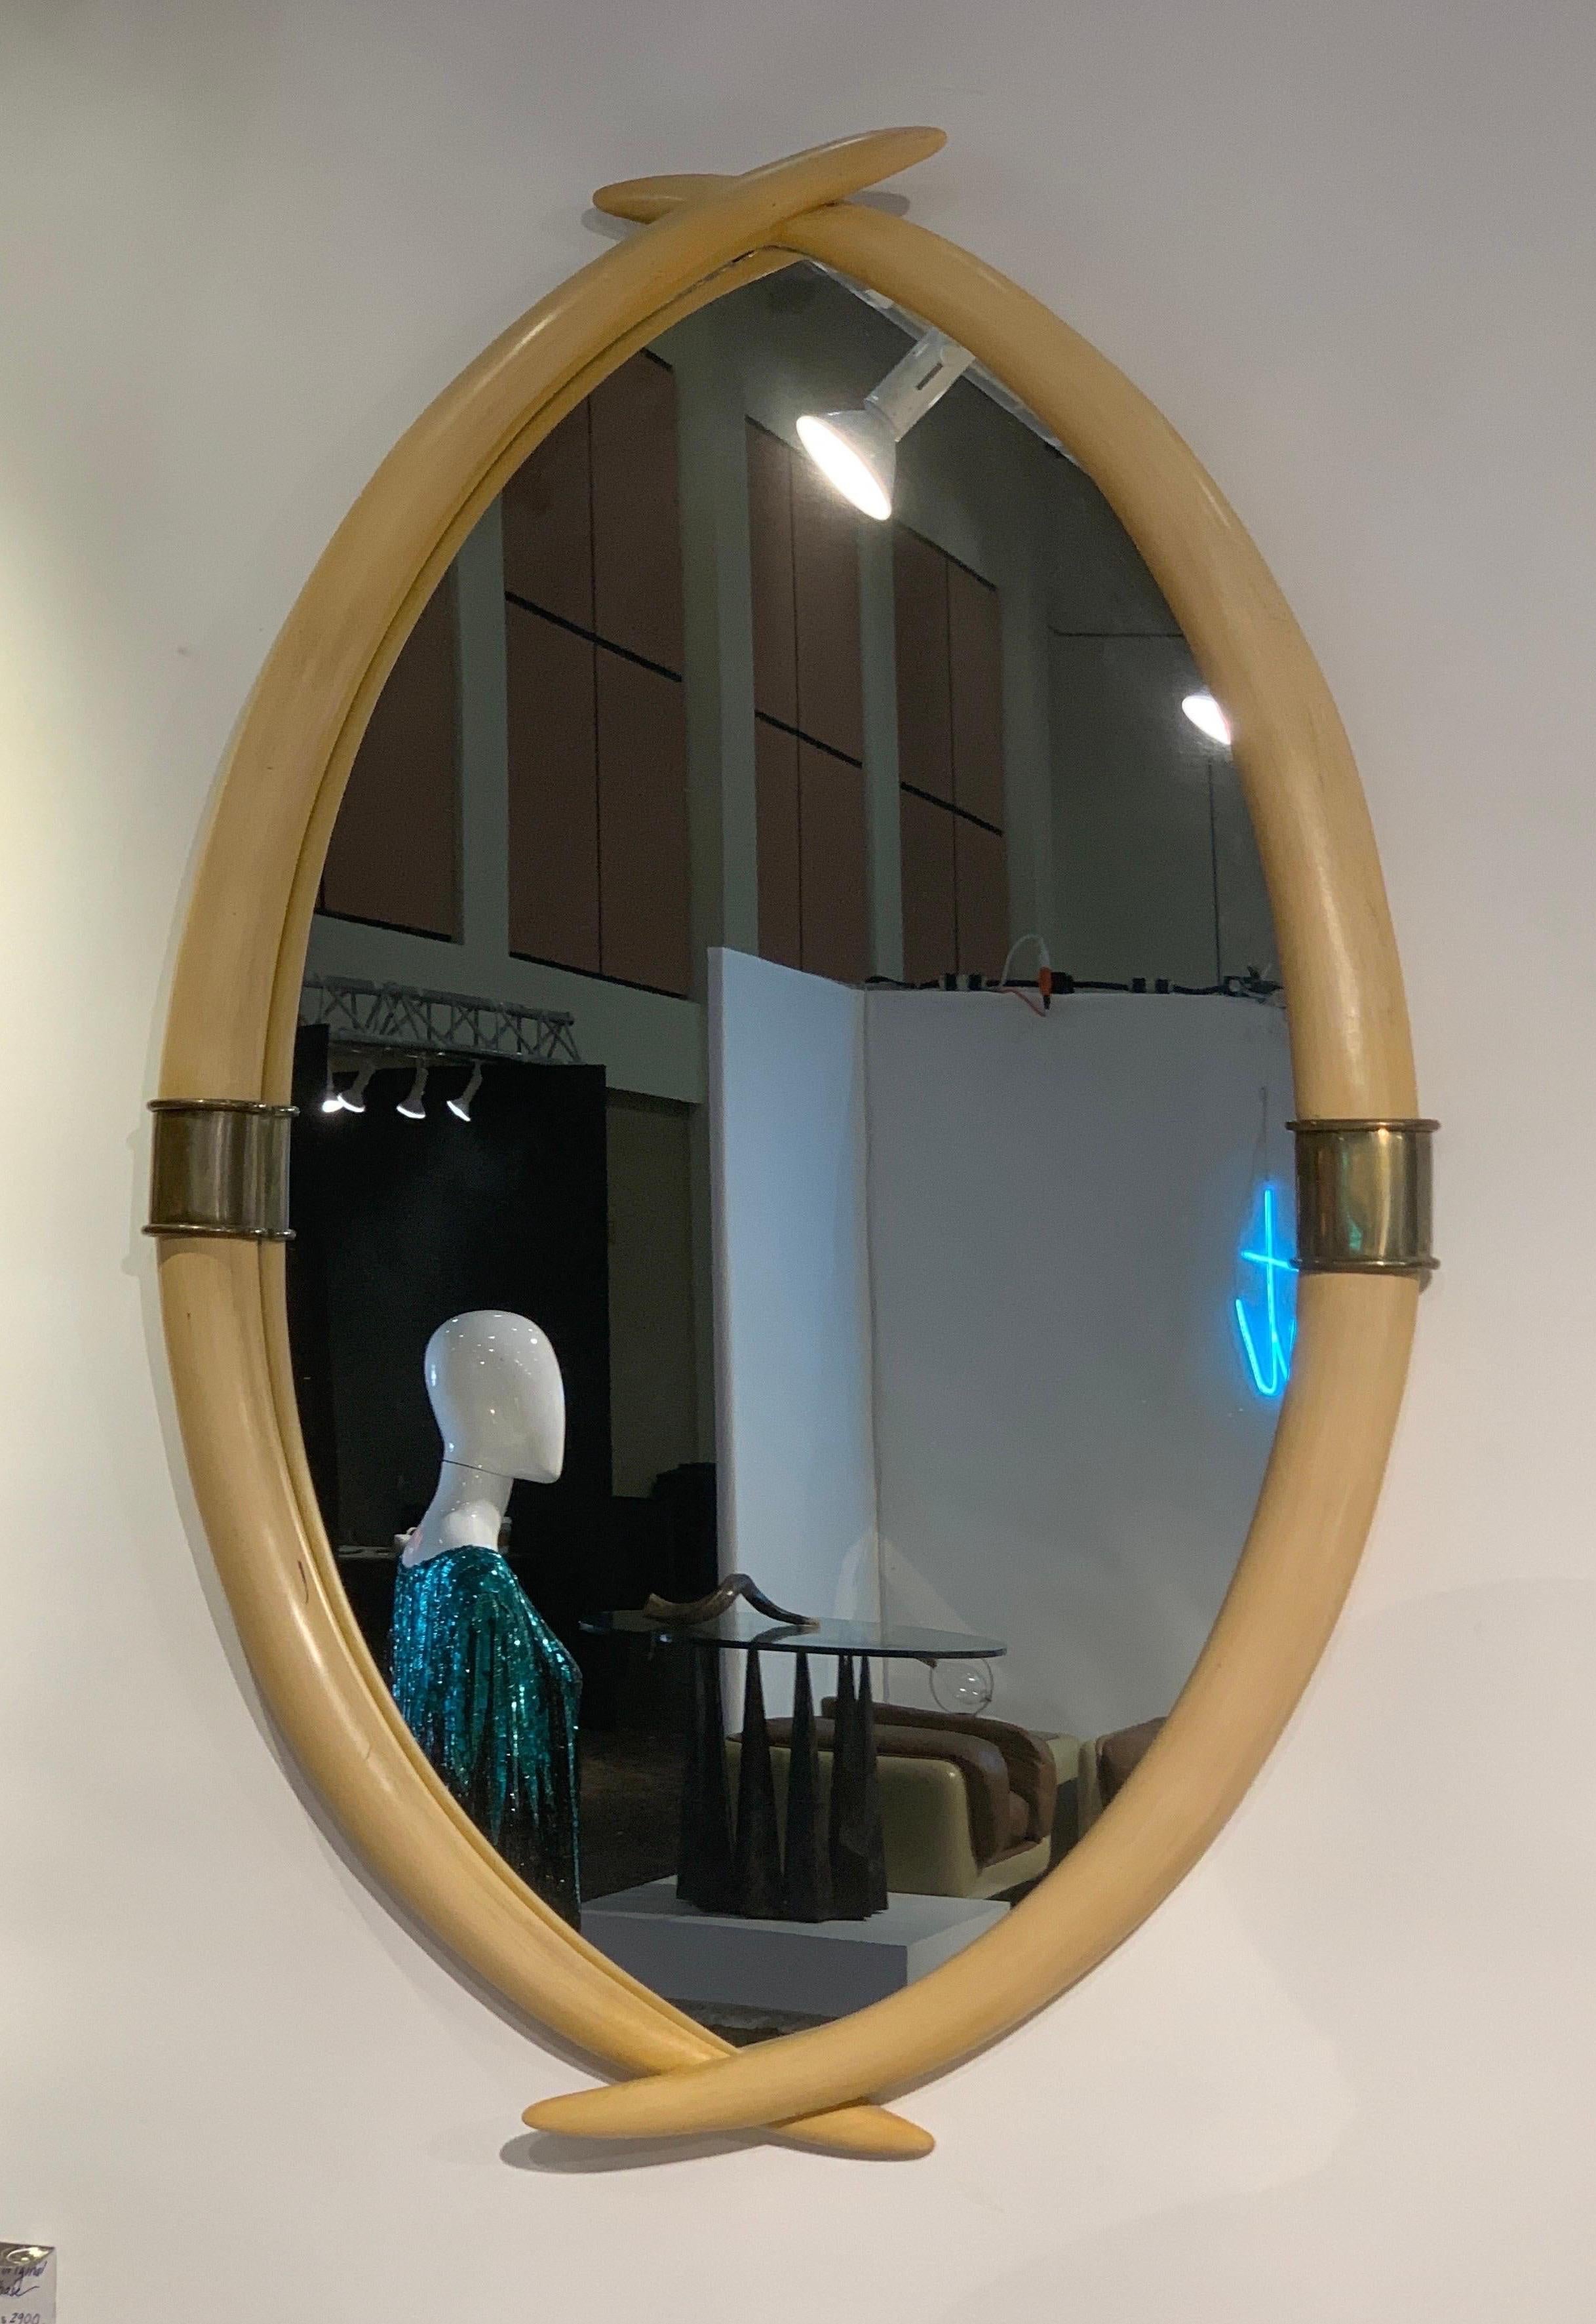 These vintage mirrors made by high-end maker Chapman are very desirable currently and hard to find. This original owner mirror was found in a high-end estate in Palm Springs California. The mirror is in the form of crossed elephant tusks (looks like